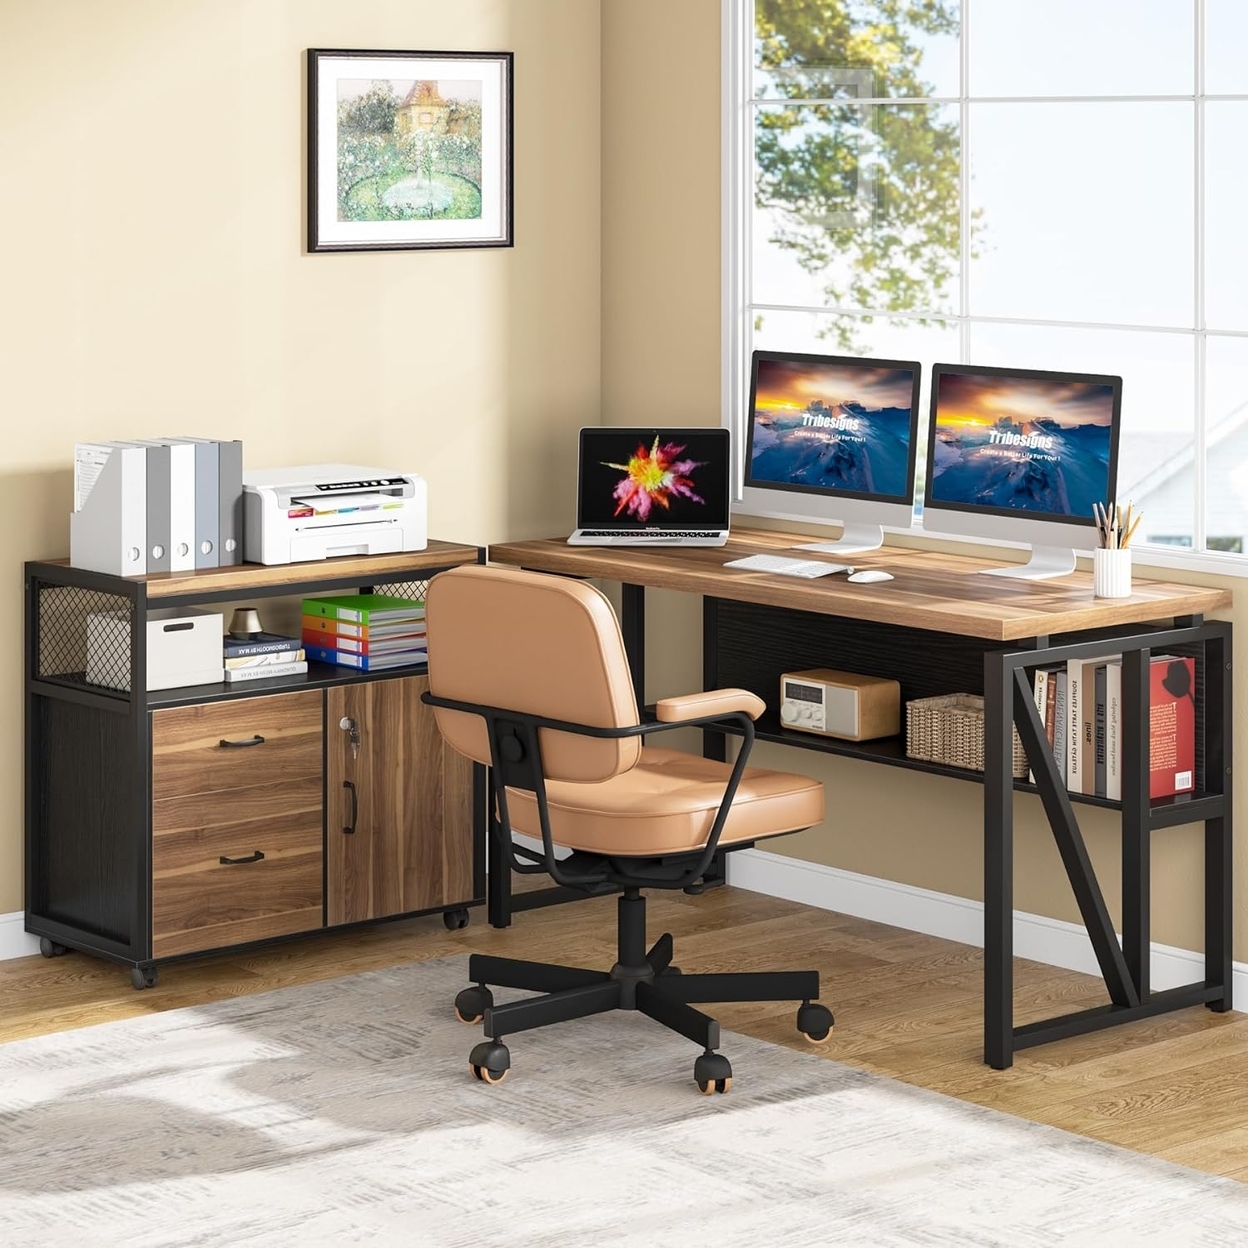 Tribesigns Office Desk With Drawers, 55 L Shaped Computer Desk With Storage Shelves And Mobile File Cabinet